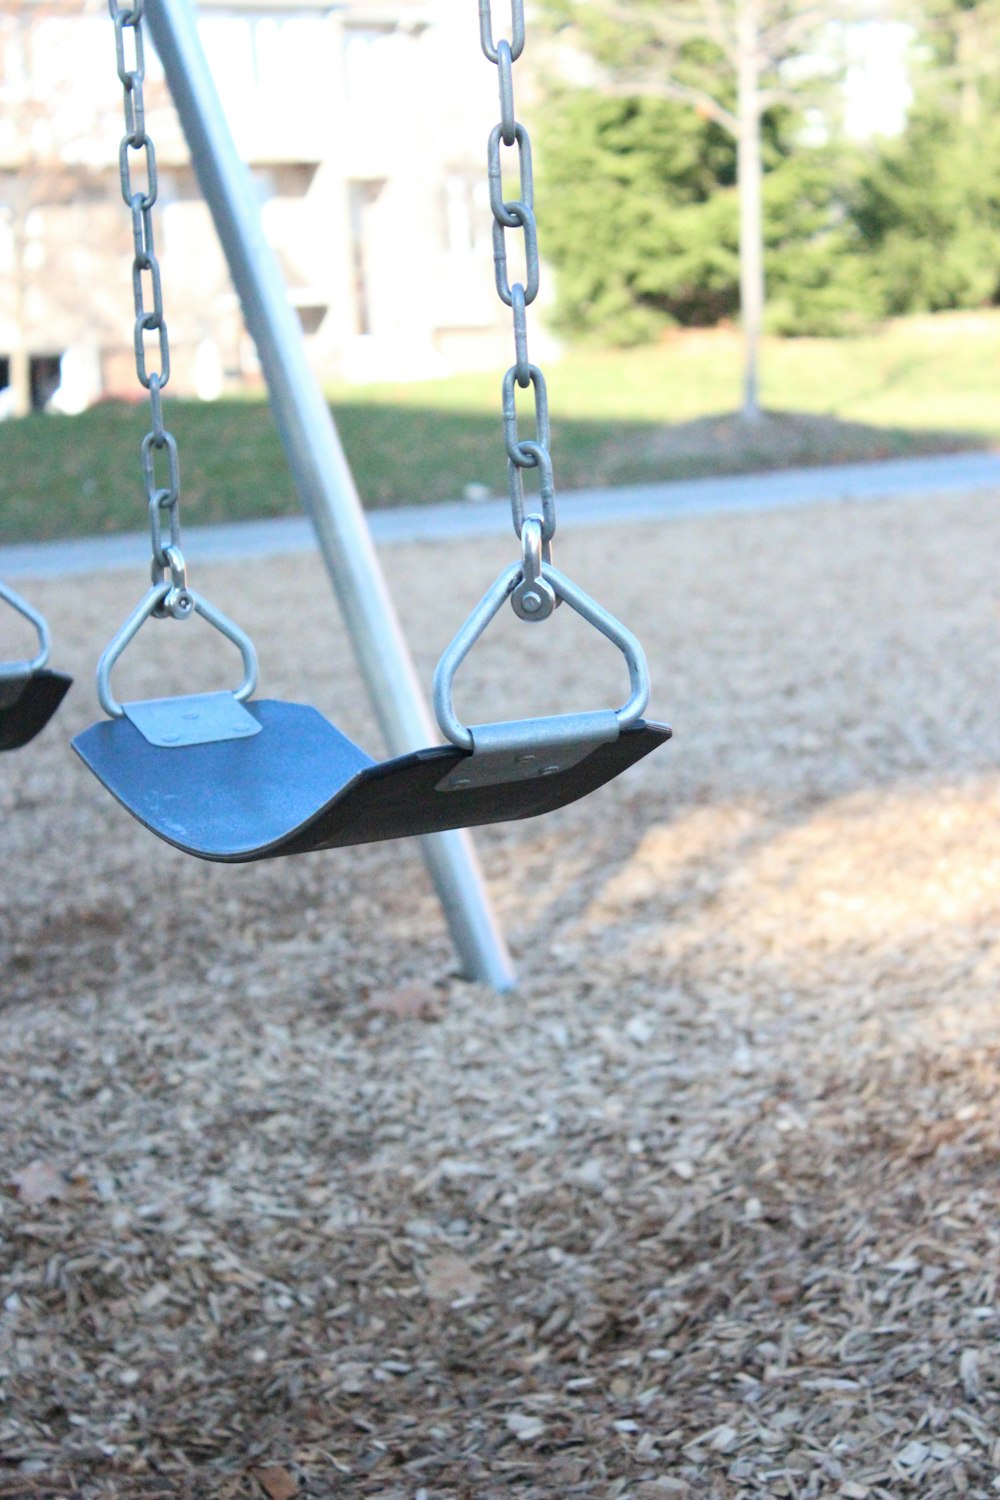 a swing set in a park with a building in the background